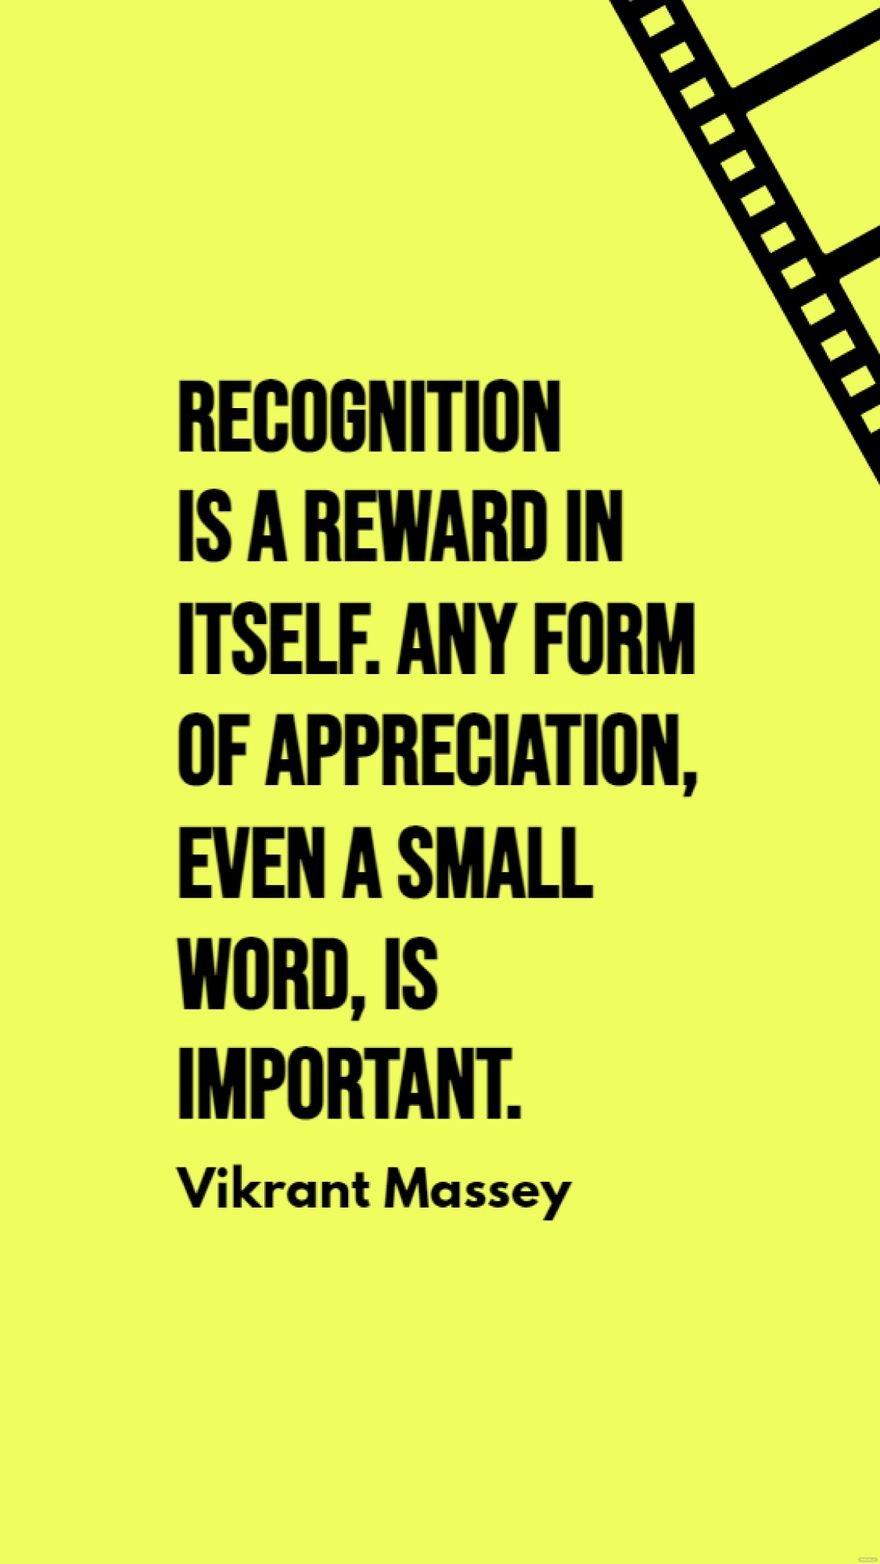 Vikrant Massey - Recognition is a reward in itself. Any form of appreciation, even a small word, is important.